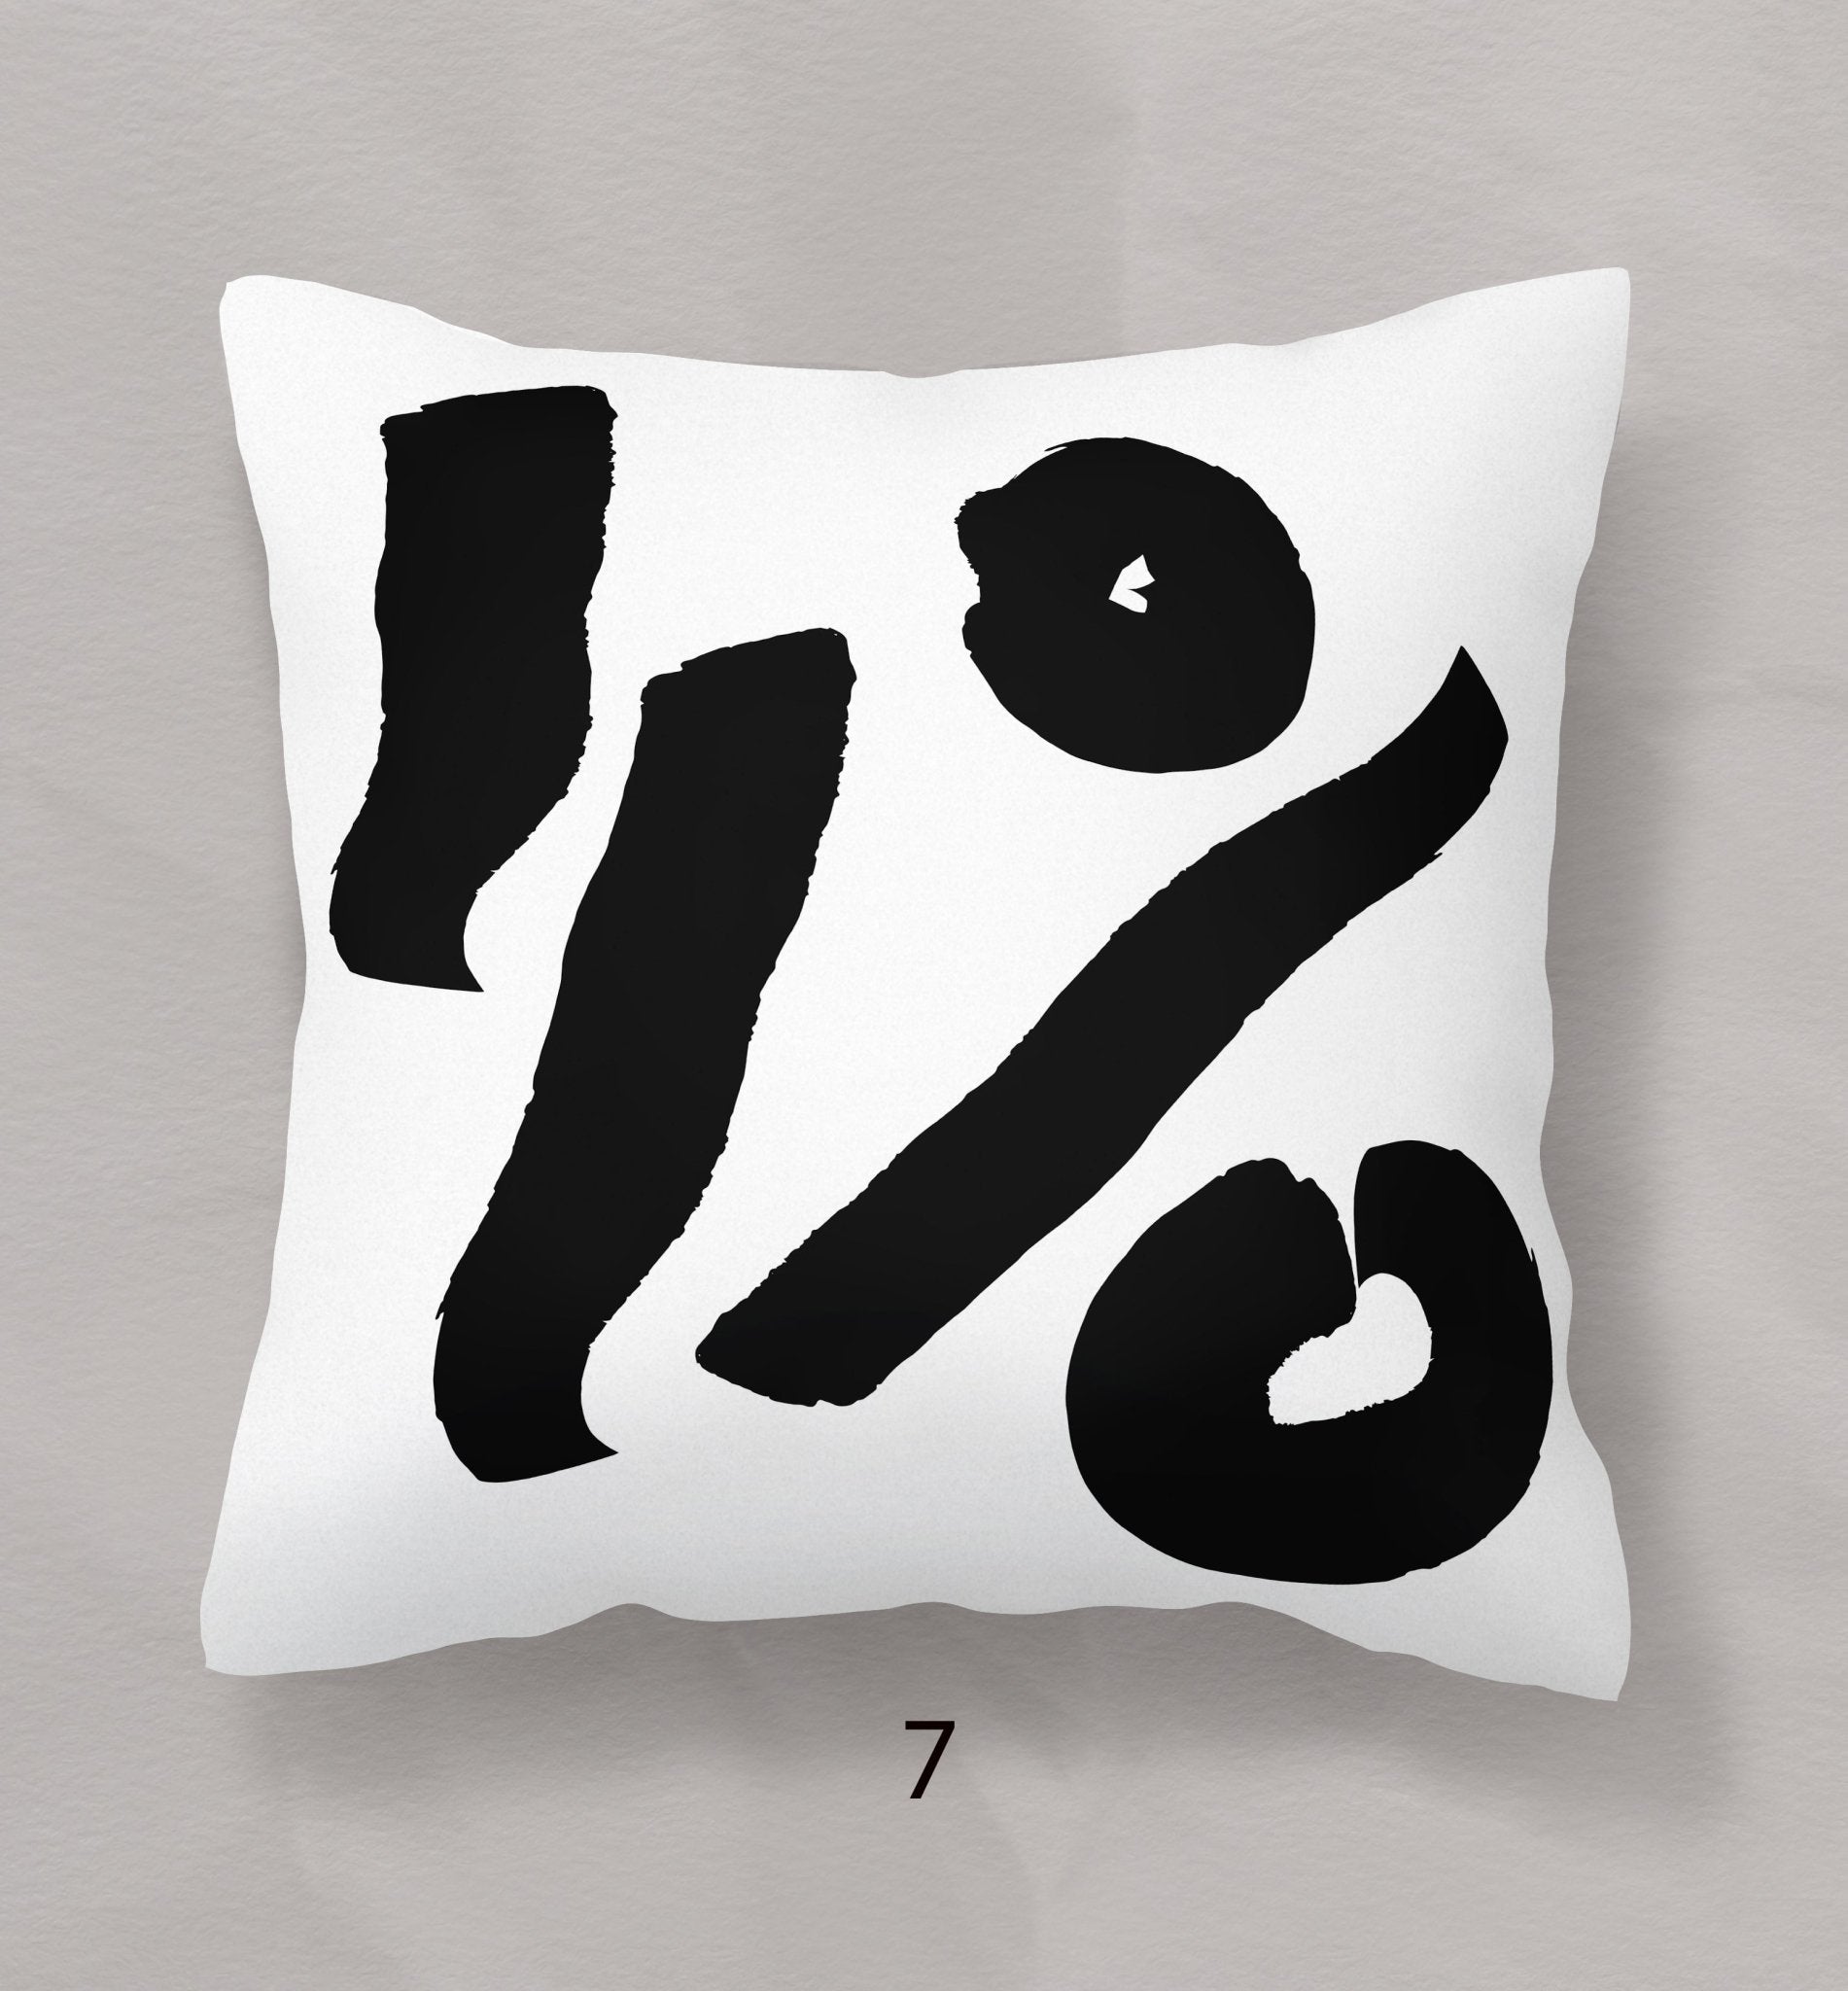 Black and White Pillow Covers - Modern Abstract - Throw Pillows